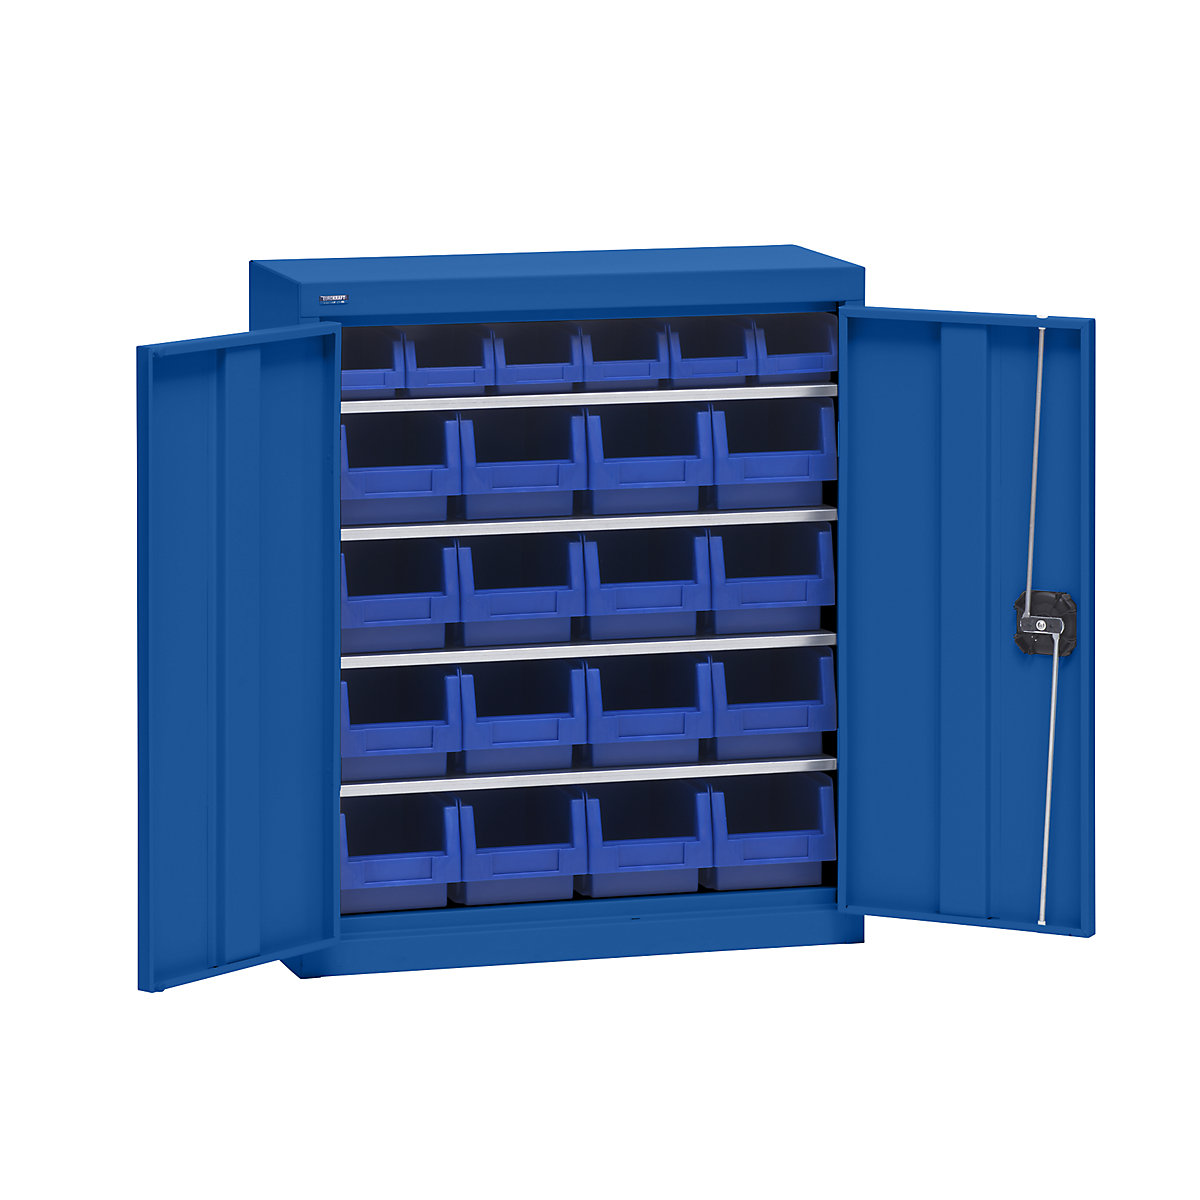 Storage cupboard with storage boxes – eurokraft pro, height 780 mm, 4 shelves, gentian blue-6